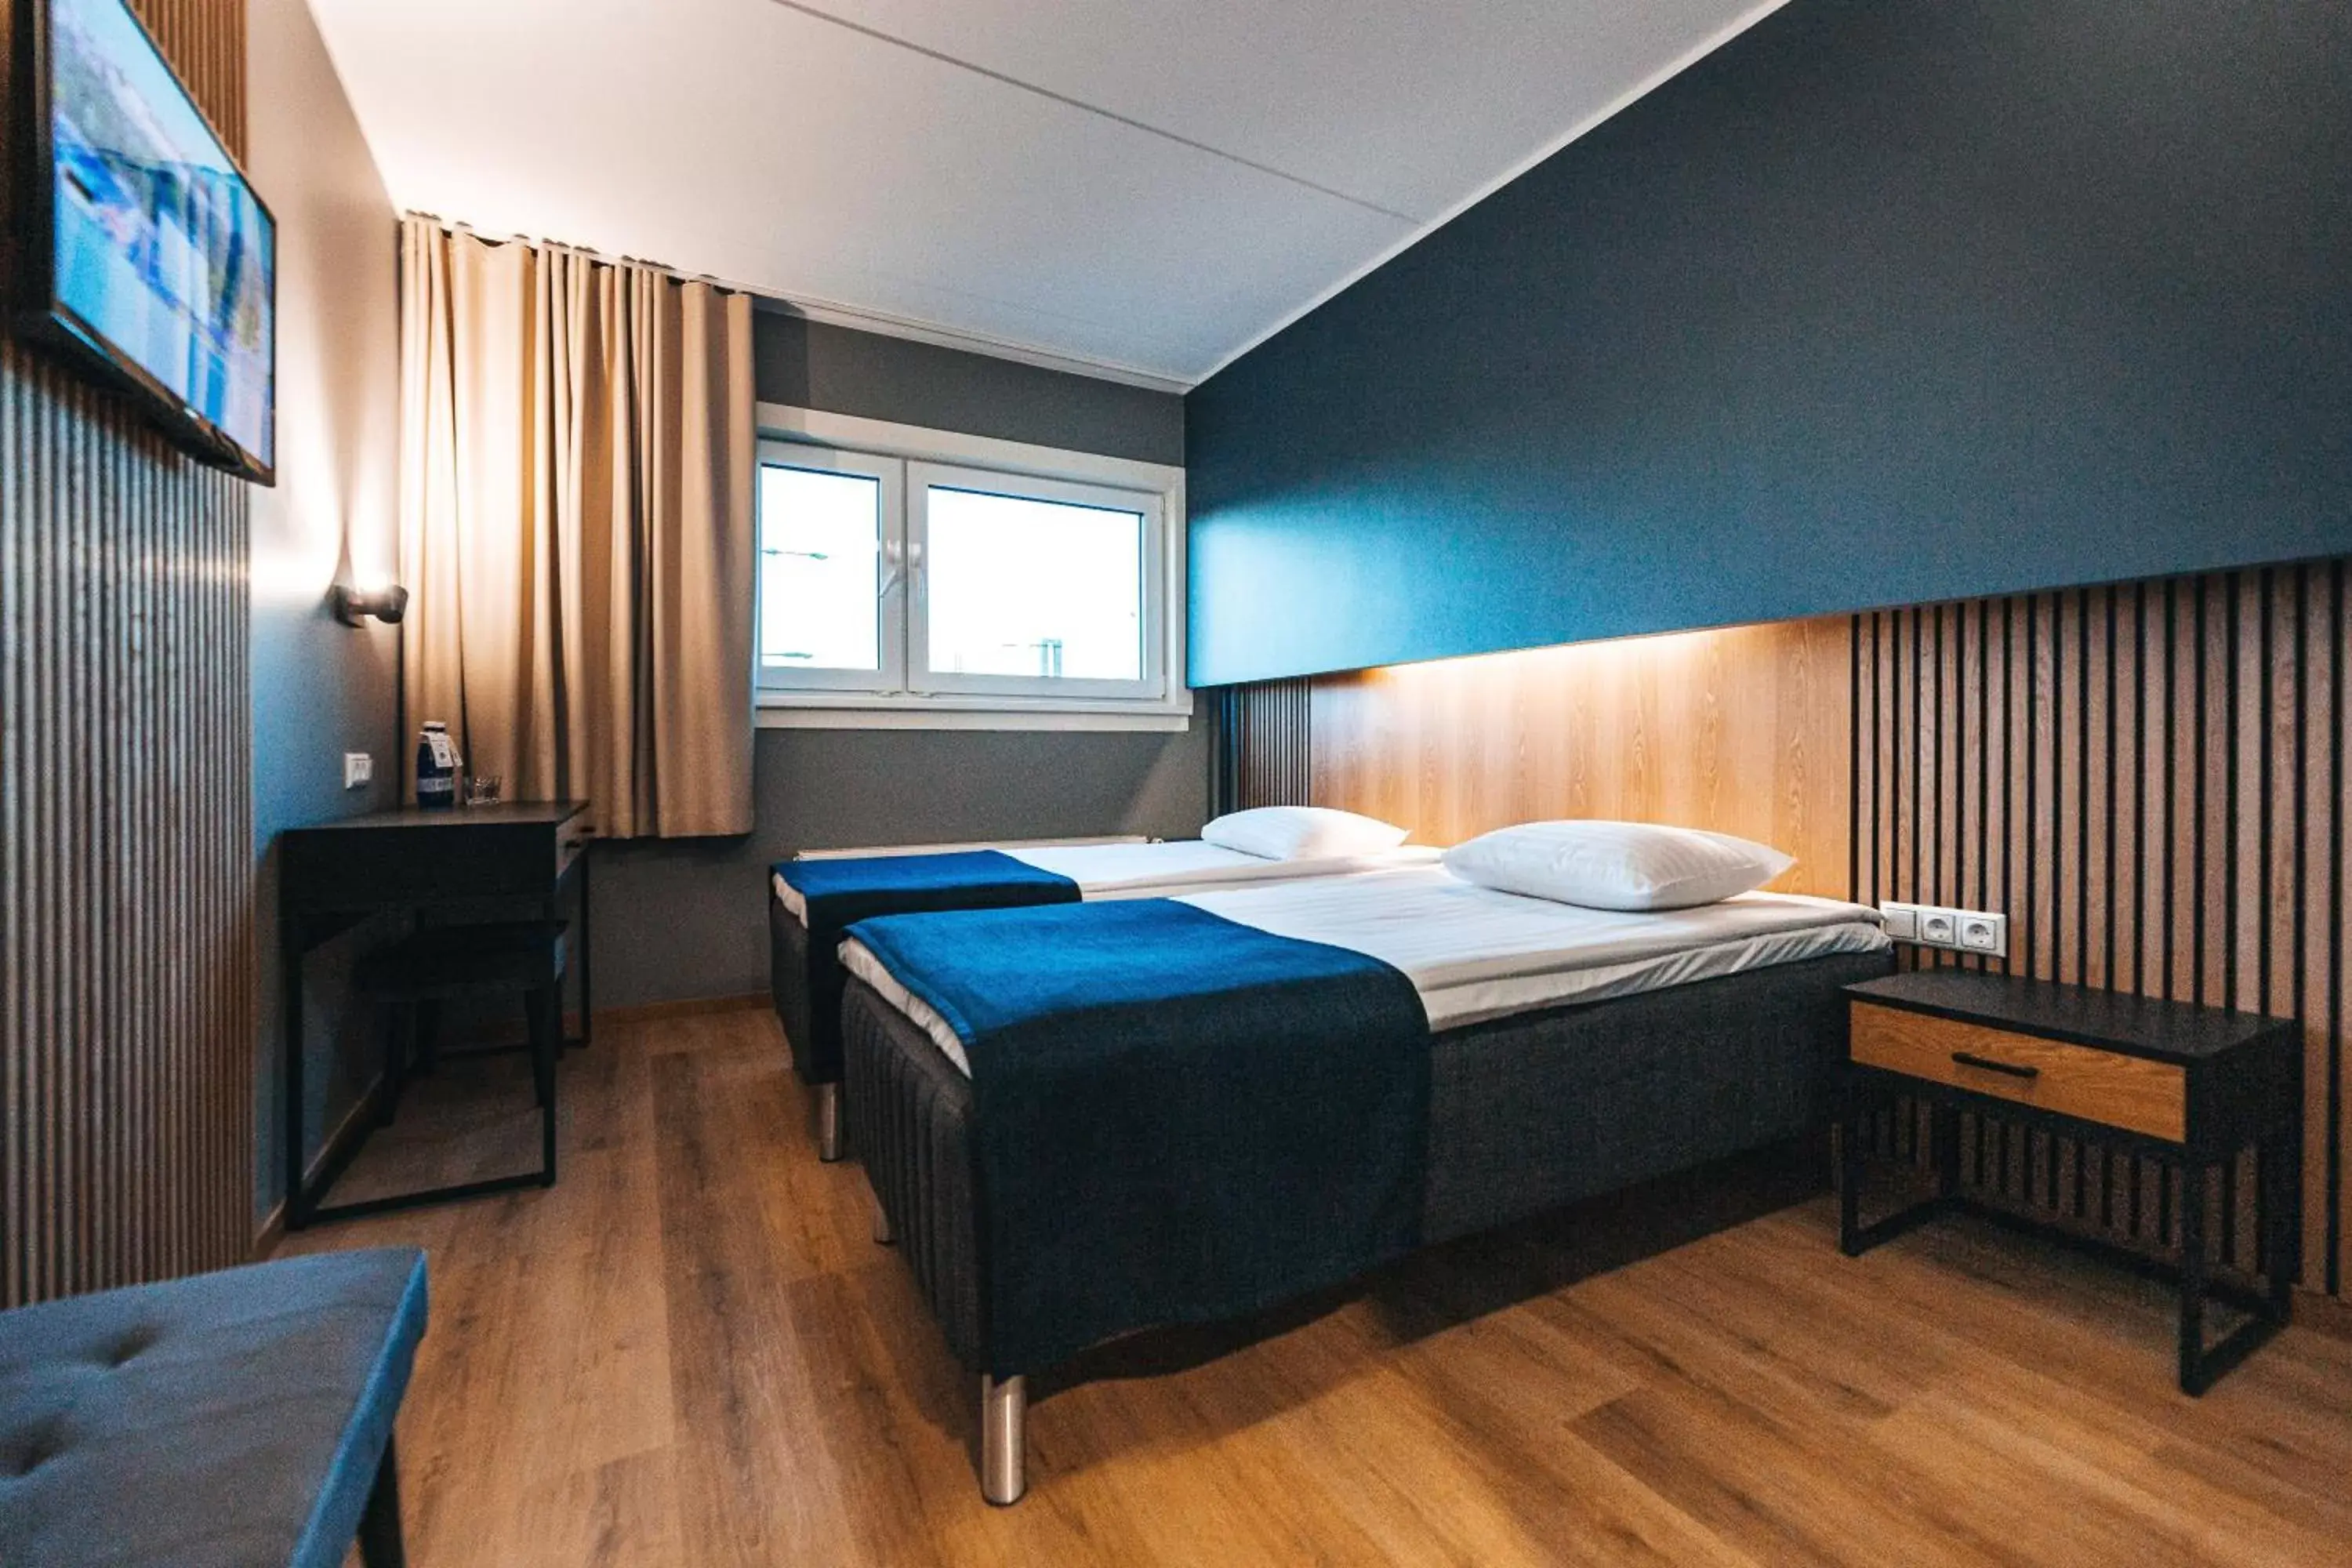 Property building, Bed in Go Hotel Shnelli